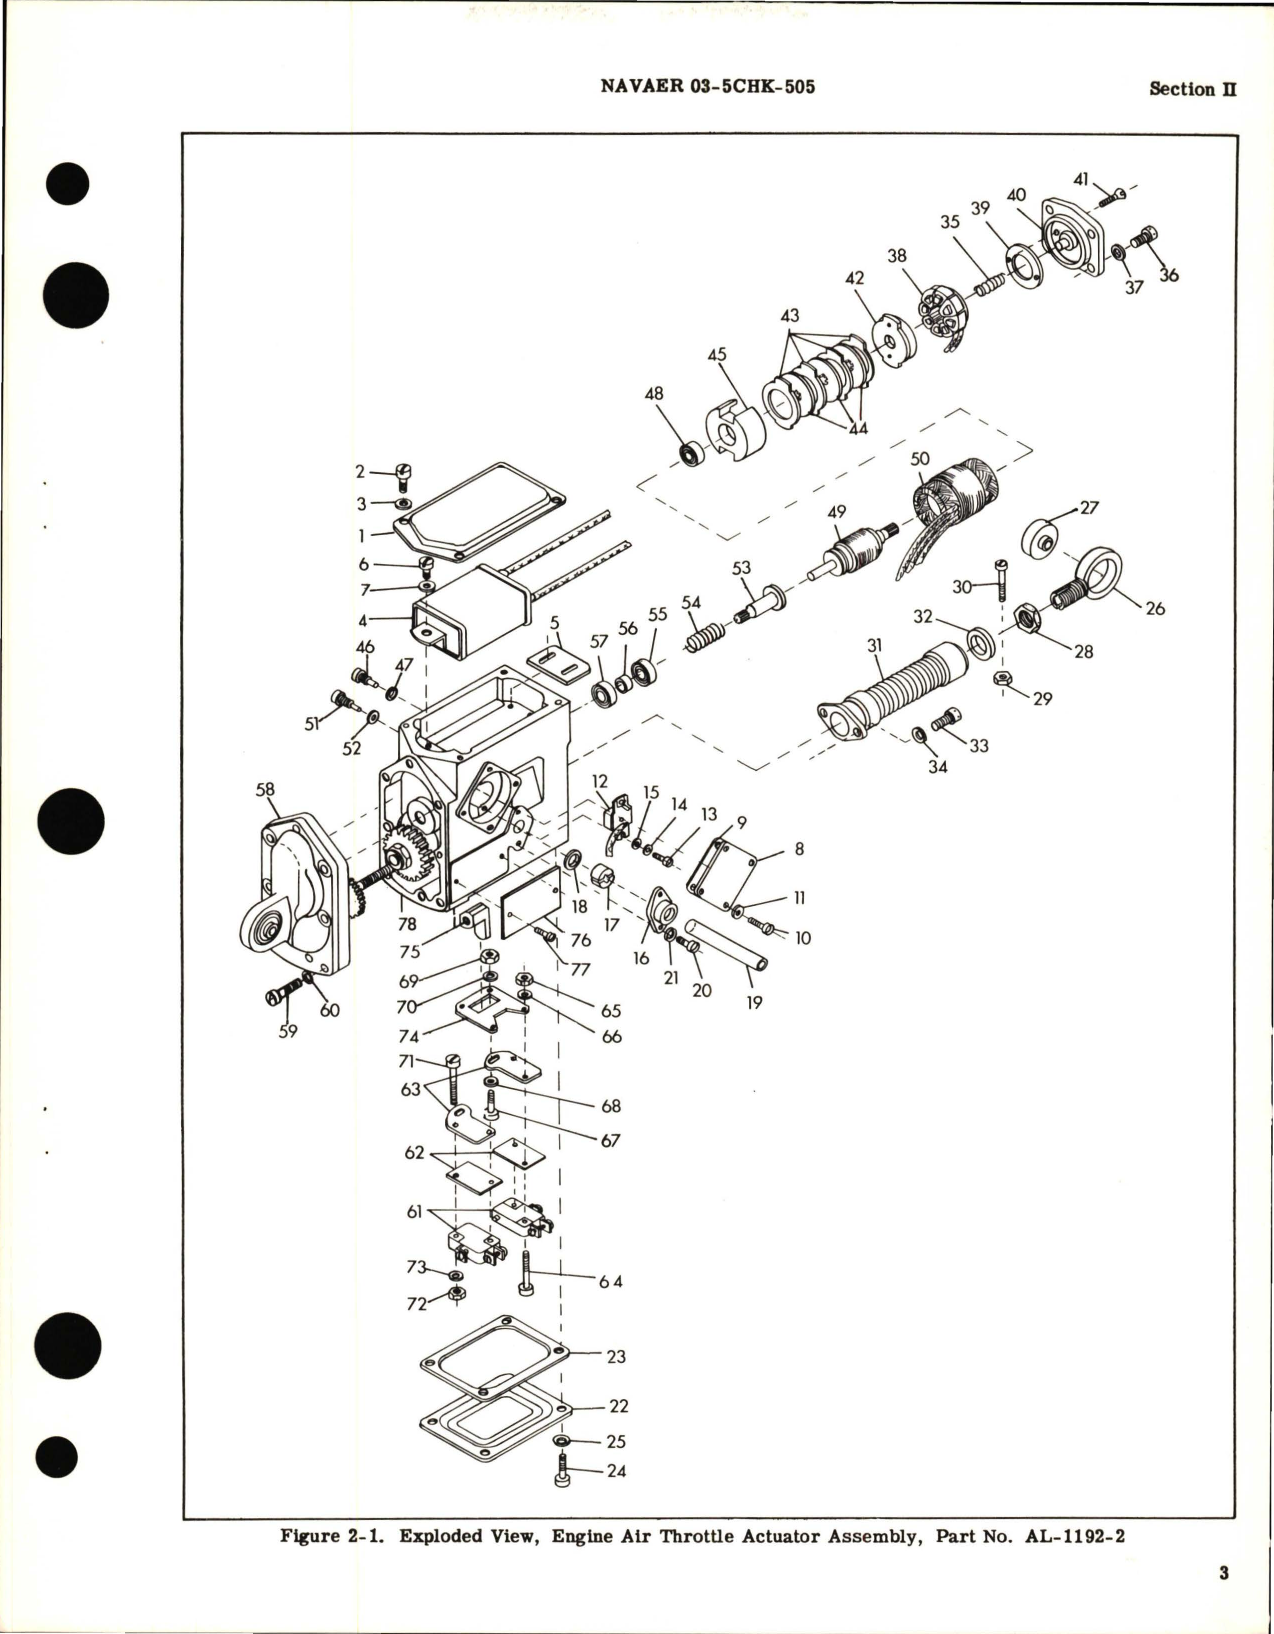 Sample page 7 from AirCorps Library document: Overhaul Instructions for Actuator Assembly Engine Air Throttle, Part No. AL-1192-2, Type 301-1-B